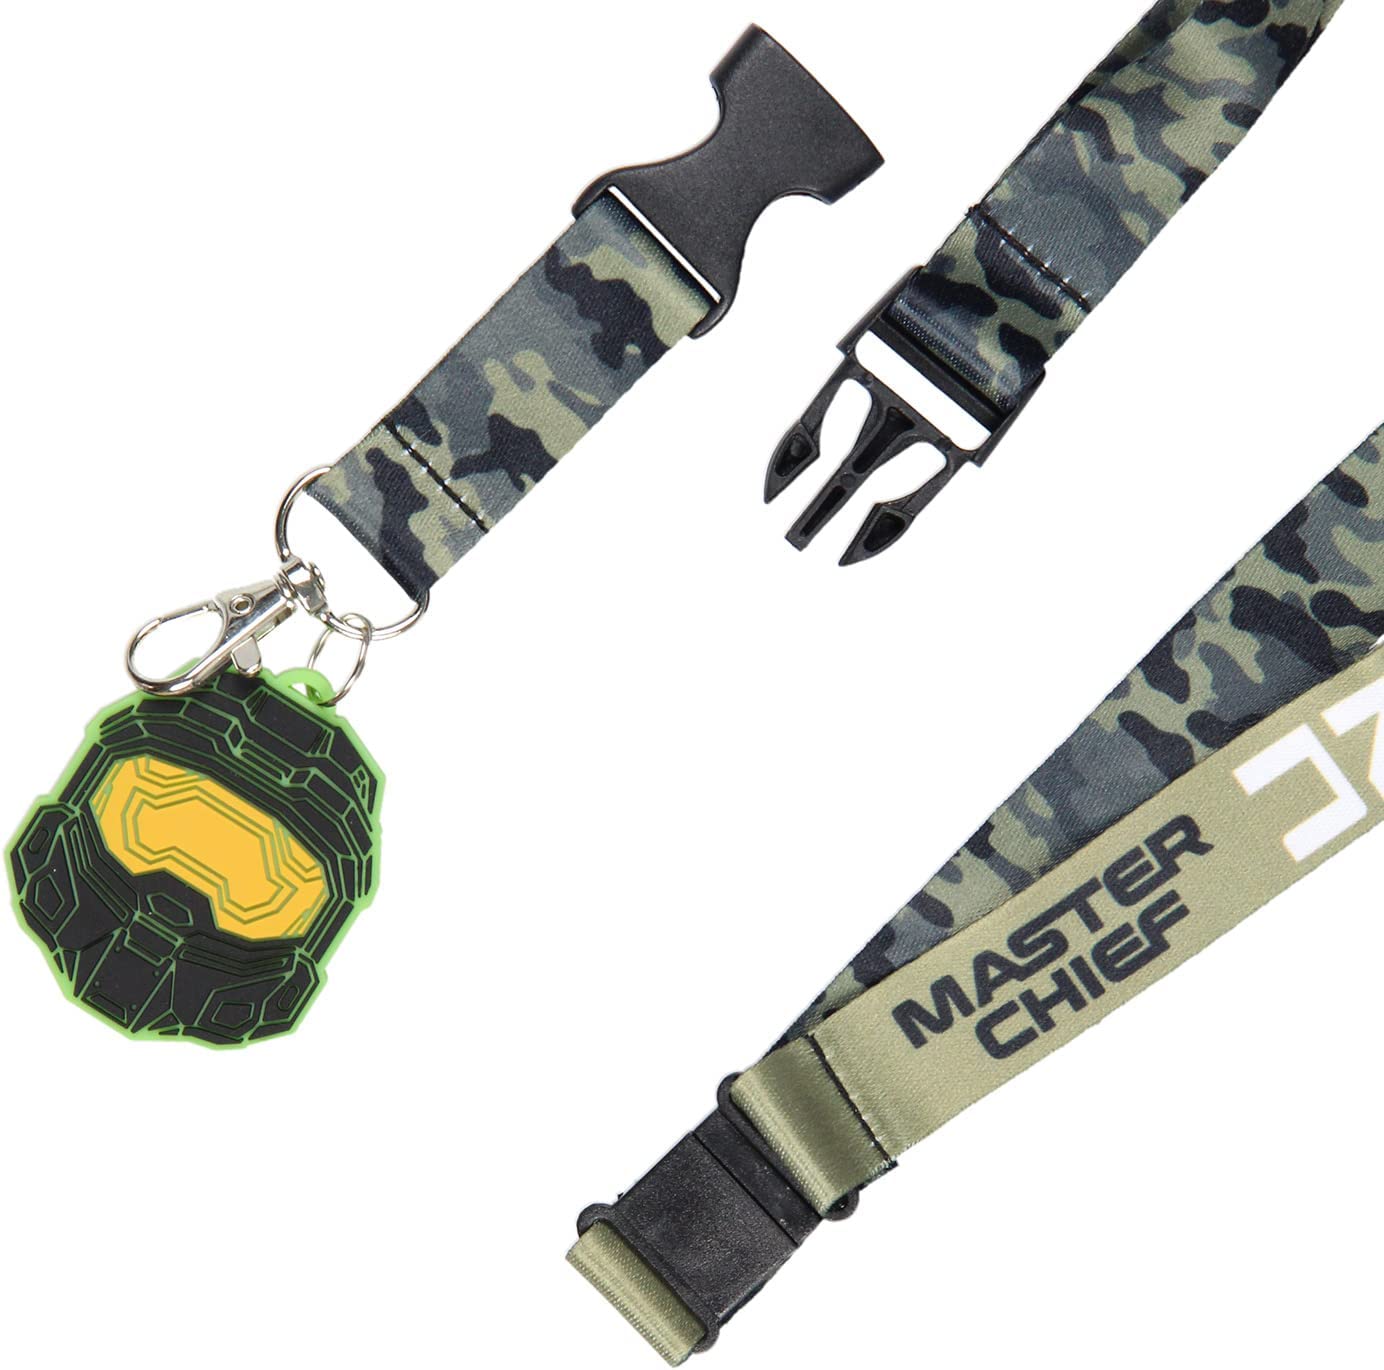 Halo Video Game Lanyard Keychain w/ 2 Master Chief Rubber Charm – Rex  Distributor, Inc. Wholesale Licensed Products and T-shirts, Sporting goods